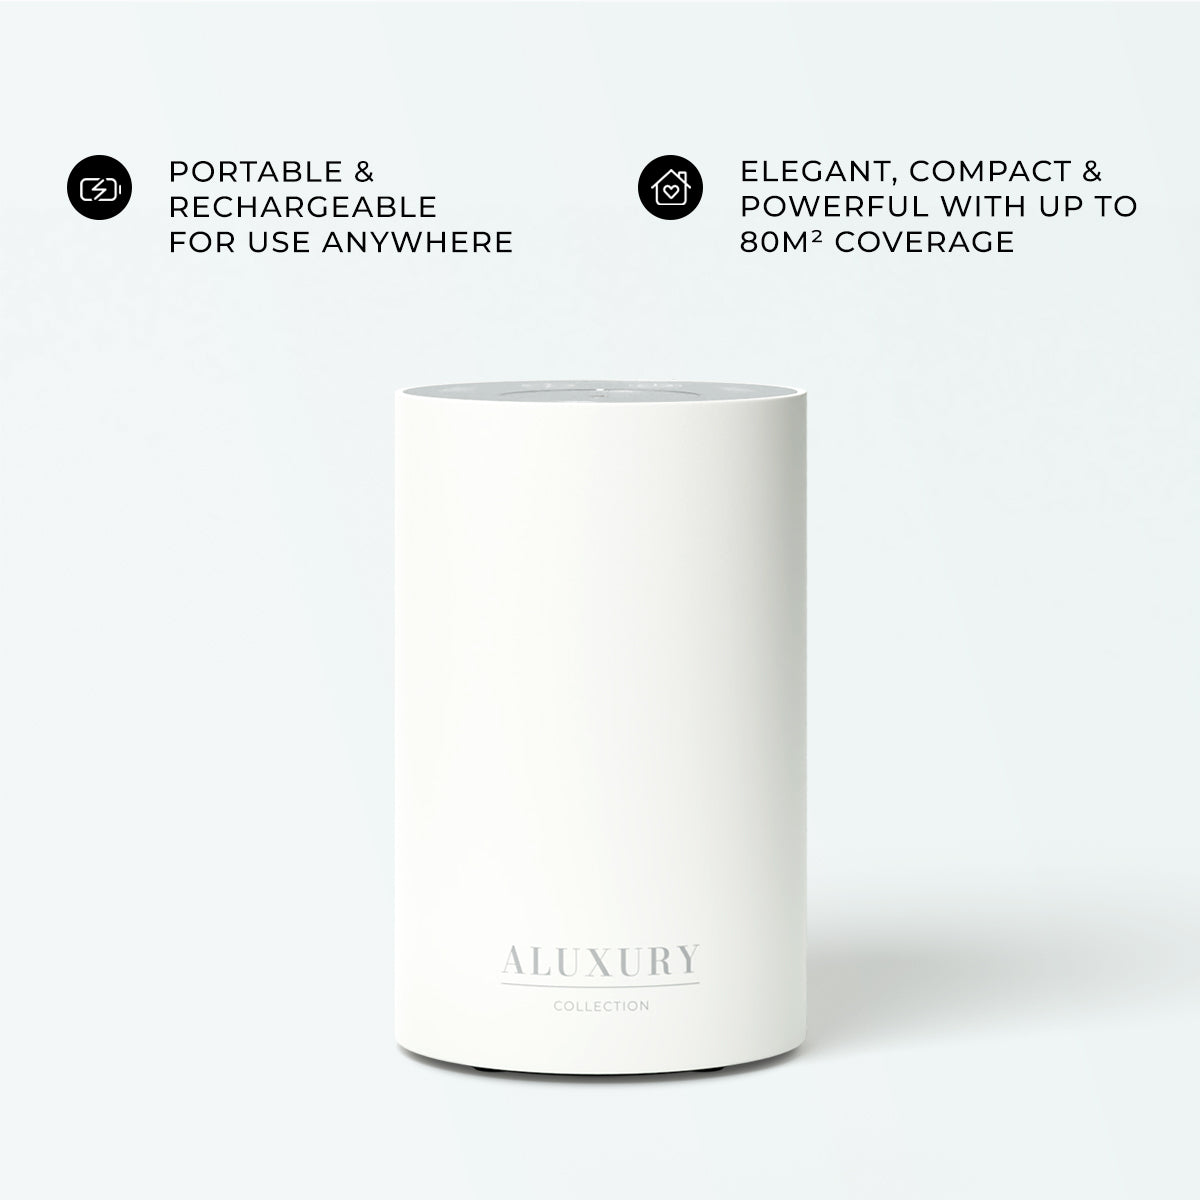 Portable Oil Diffuser with powerful coverage  